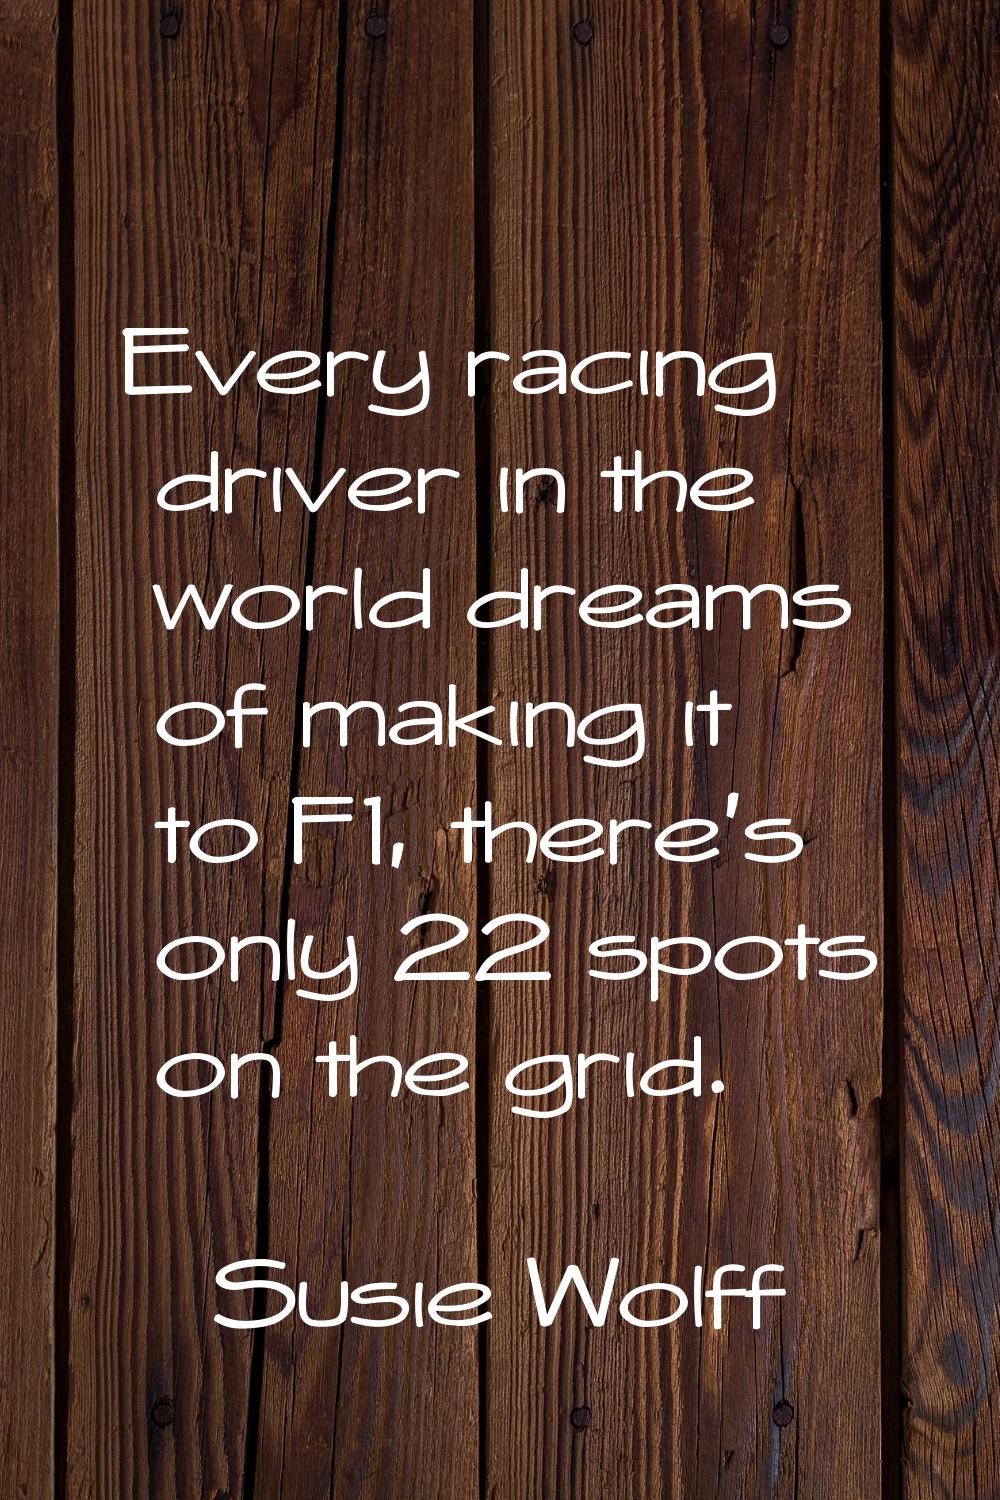 Every racing driver in the world dreams of making it to F1, there's only 22 spots on the grid.